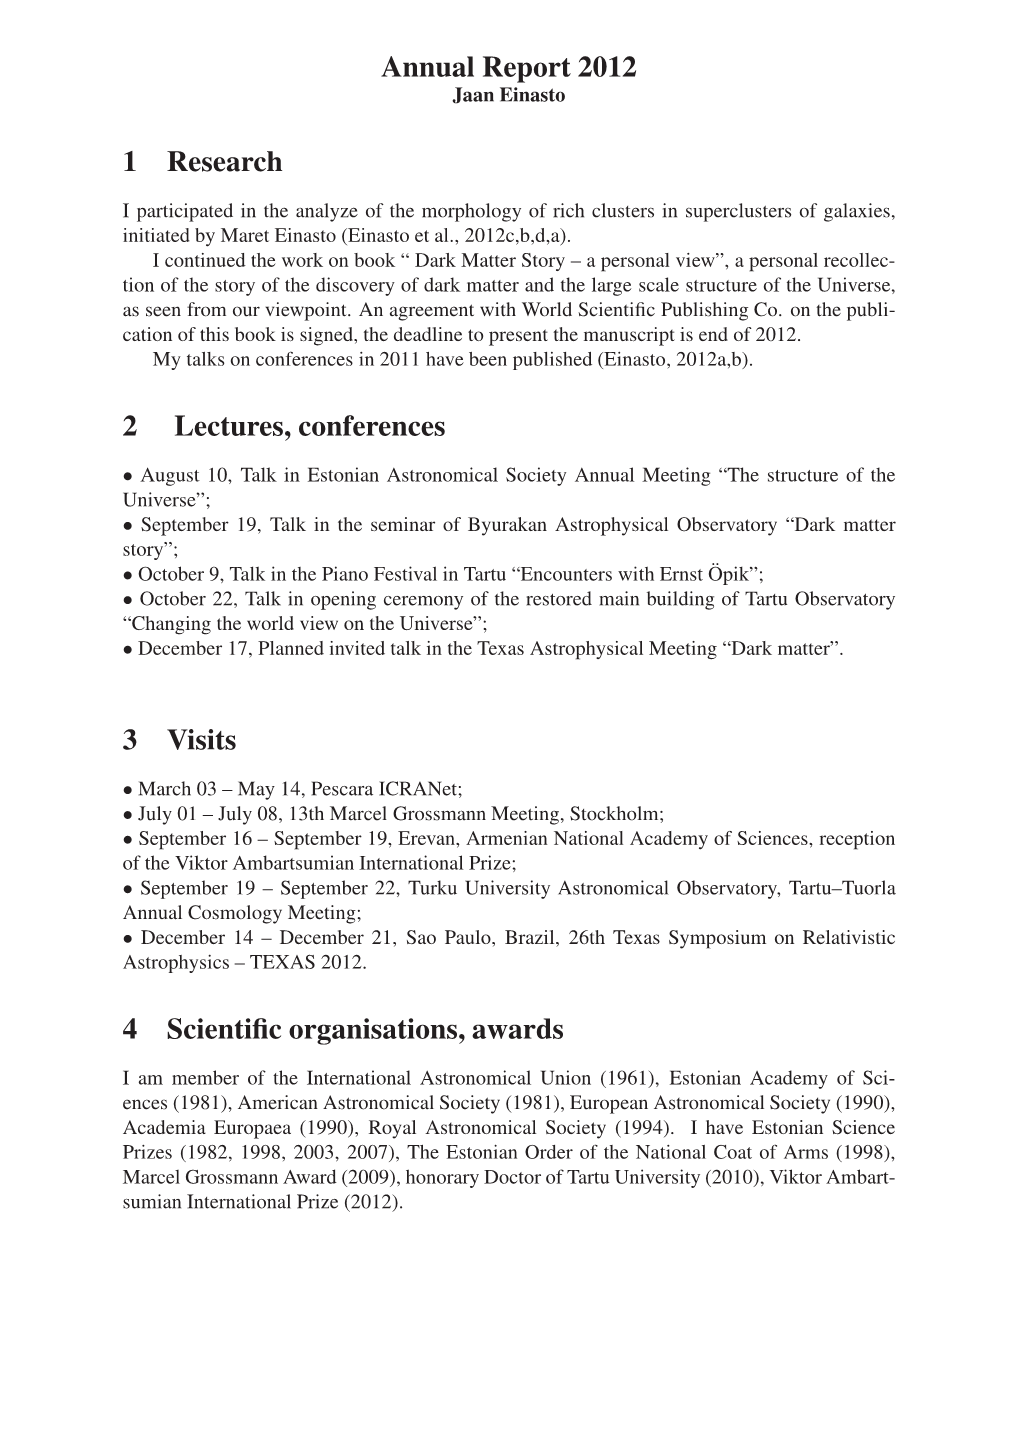 Annual Report 2012 1 Research 2 Lectures, Conferences 3 Visits 4